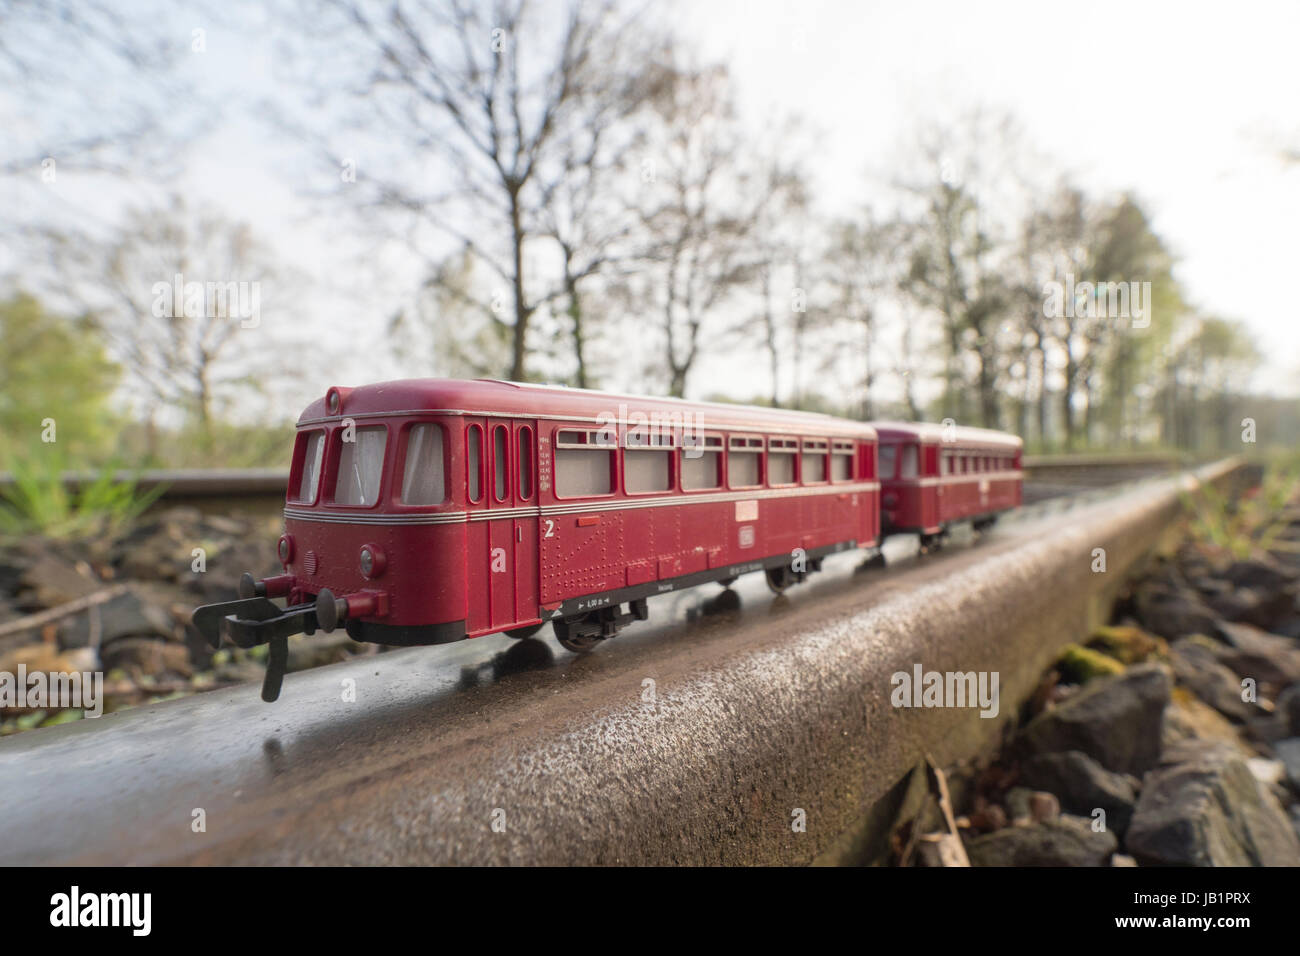 Red train model, bus-style train,  on real rails, original train served as local public transport, Celle, Germany Stock Photo